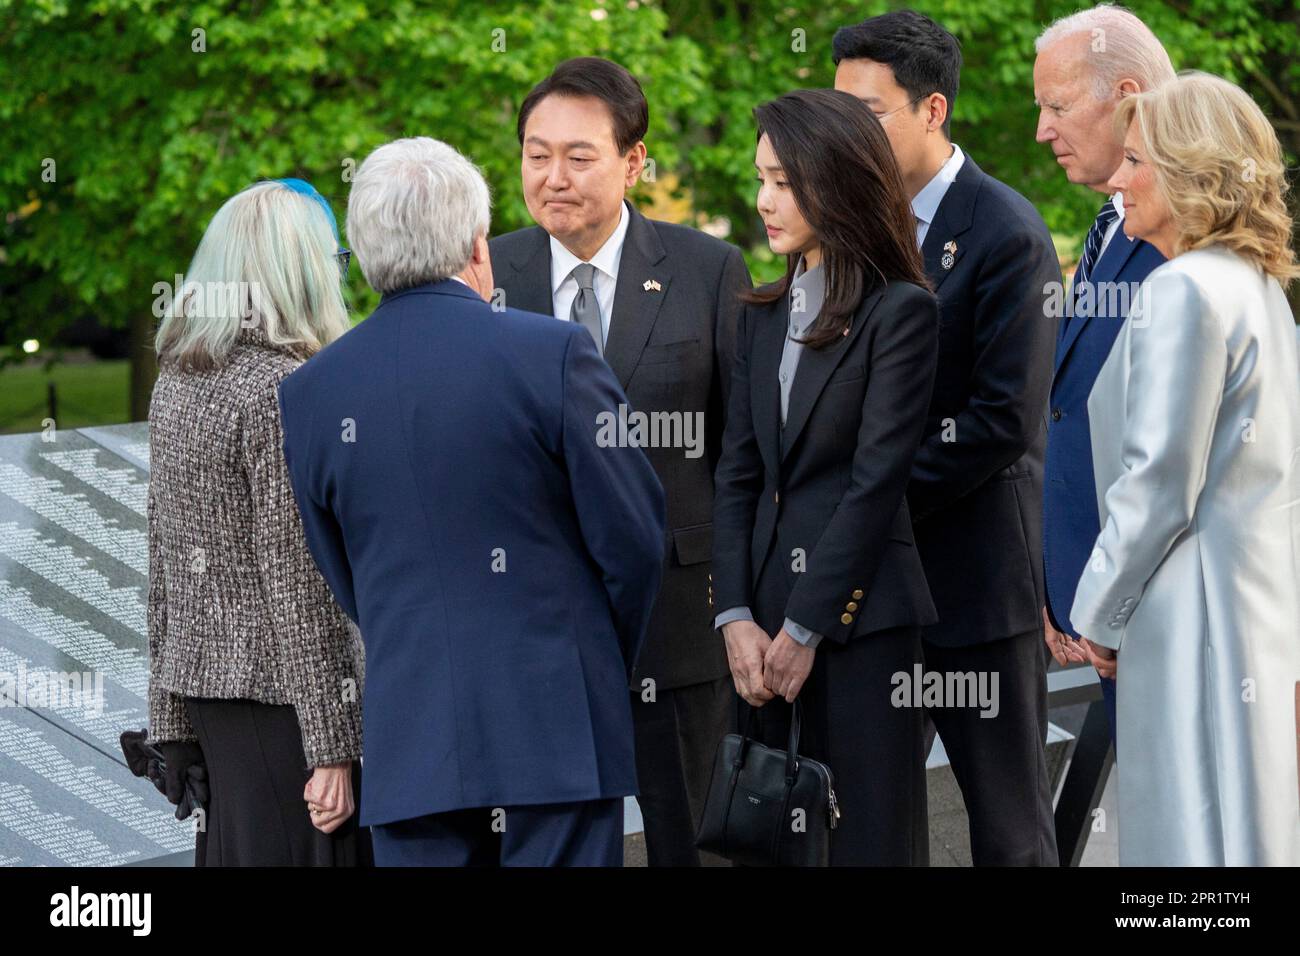 Washington, United States. 25th Apr, 2023. President Joe Biden and First Lady Jill Biden with President Yoon Suk Yeol of the Republic of Korea and Mrs. Kim Keon Hee, First Lady of the Republic of Korea, talk with with Judy Wade, the niece of Medal of Honor recipient Corporal Luther Story, and her spouse Joseph Wade during a visit to the Korean War Memorial in Washington, DC, USA, 25 April 2023. Tomorrow President Biden will host a State Visit for President Yoon Suk Yeol of the Republic of Korea. Credit: Abaca Press/Alamy Live News Stock Photo